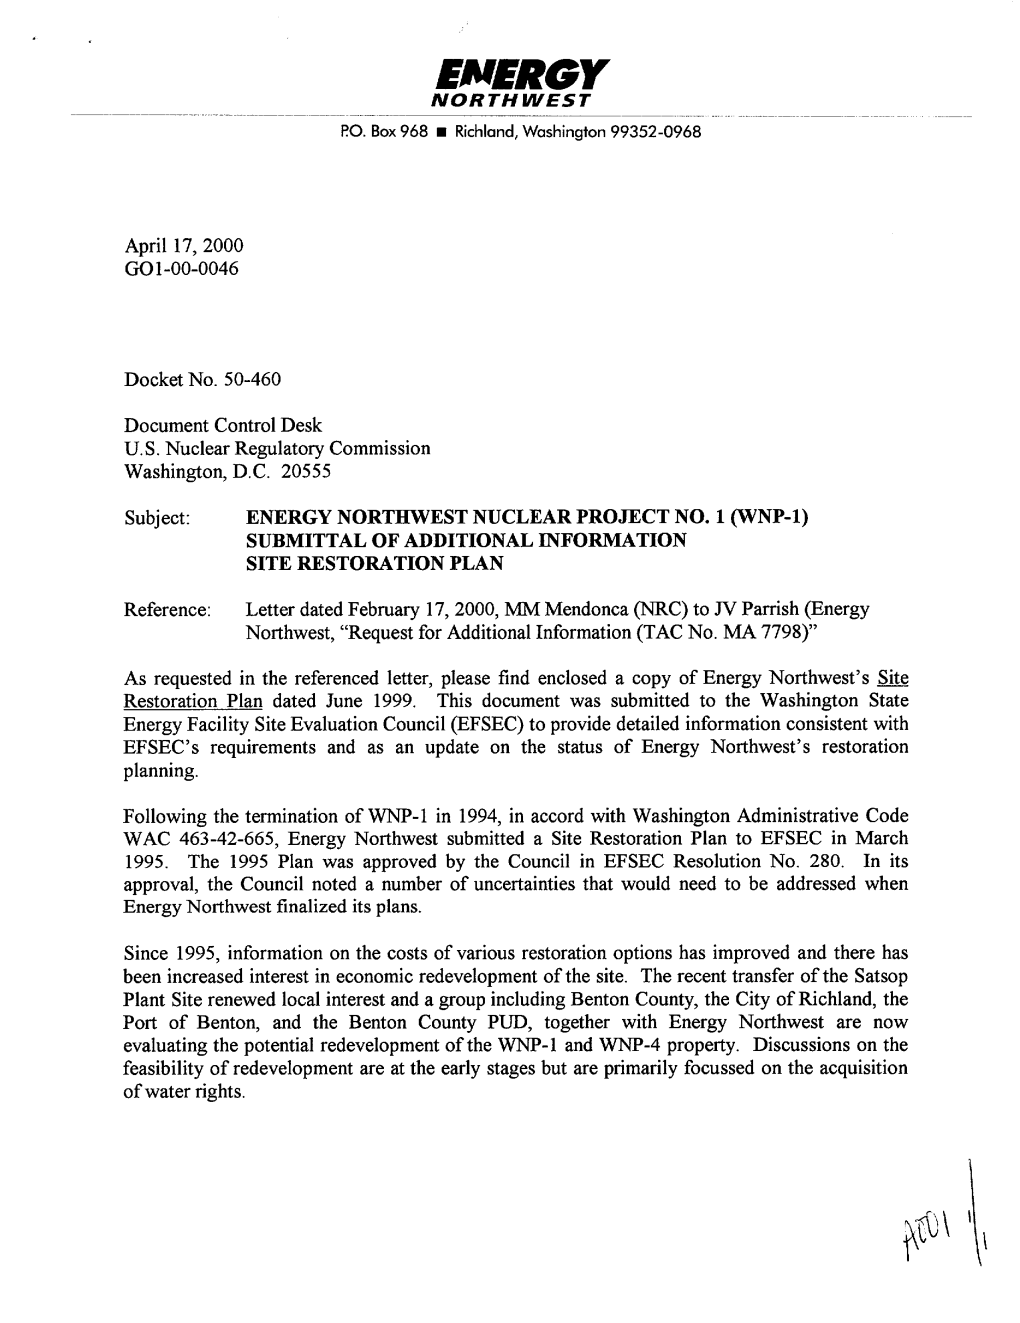 Energy Northwest Nuclear Project No. 1 (Wnp-1) Submittal of Additional Information Site Restoration Plan